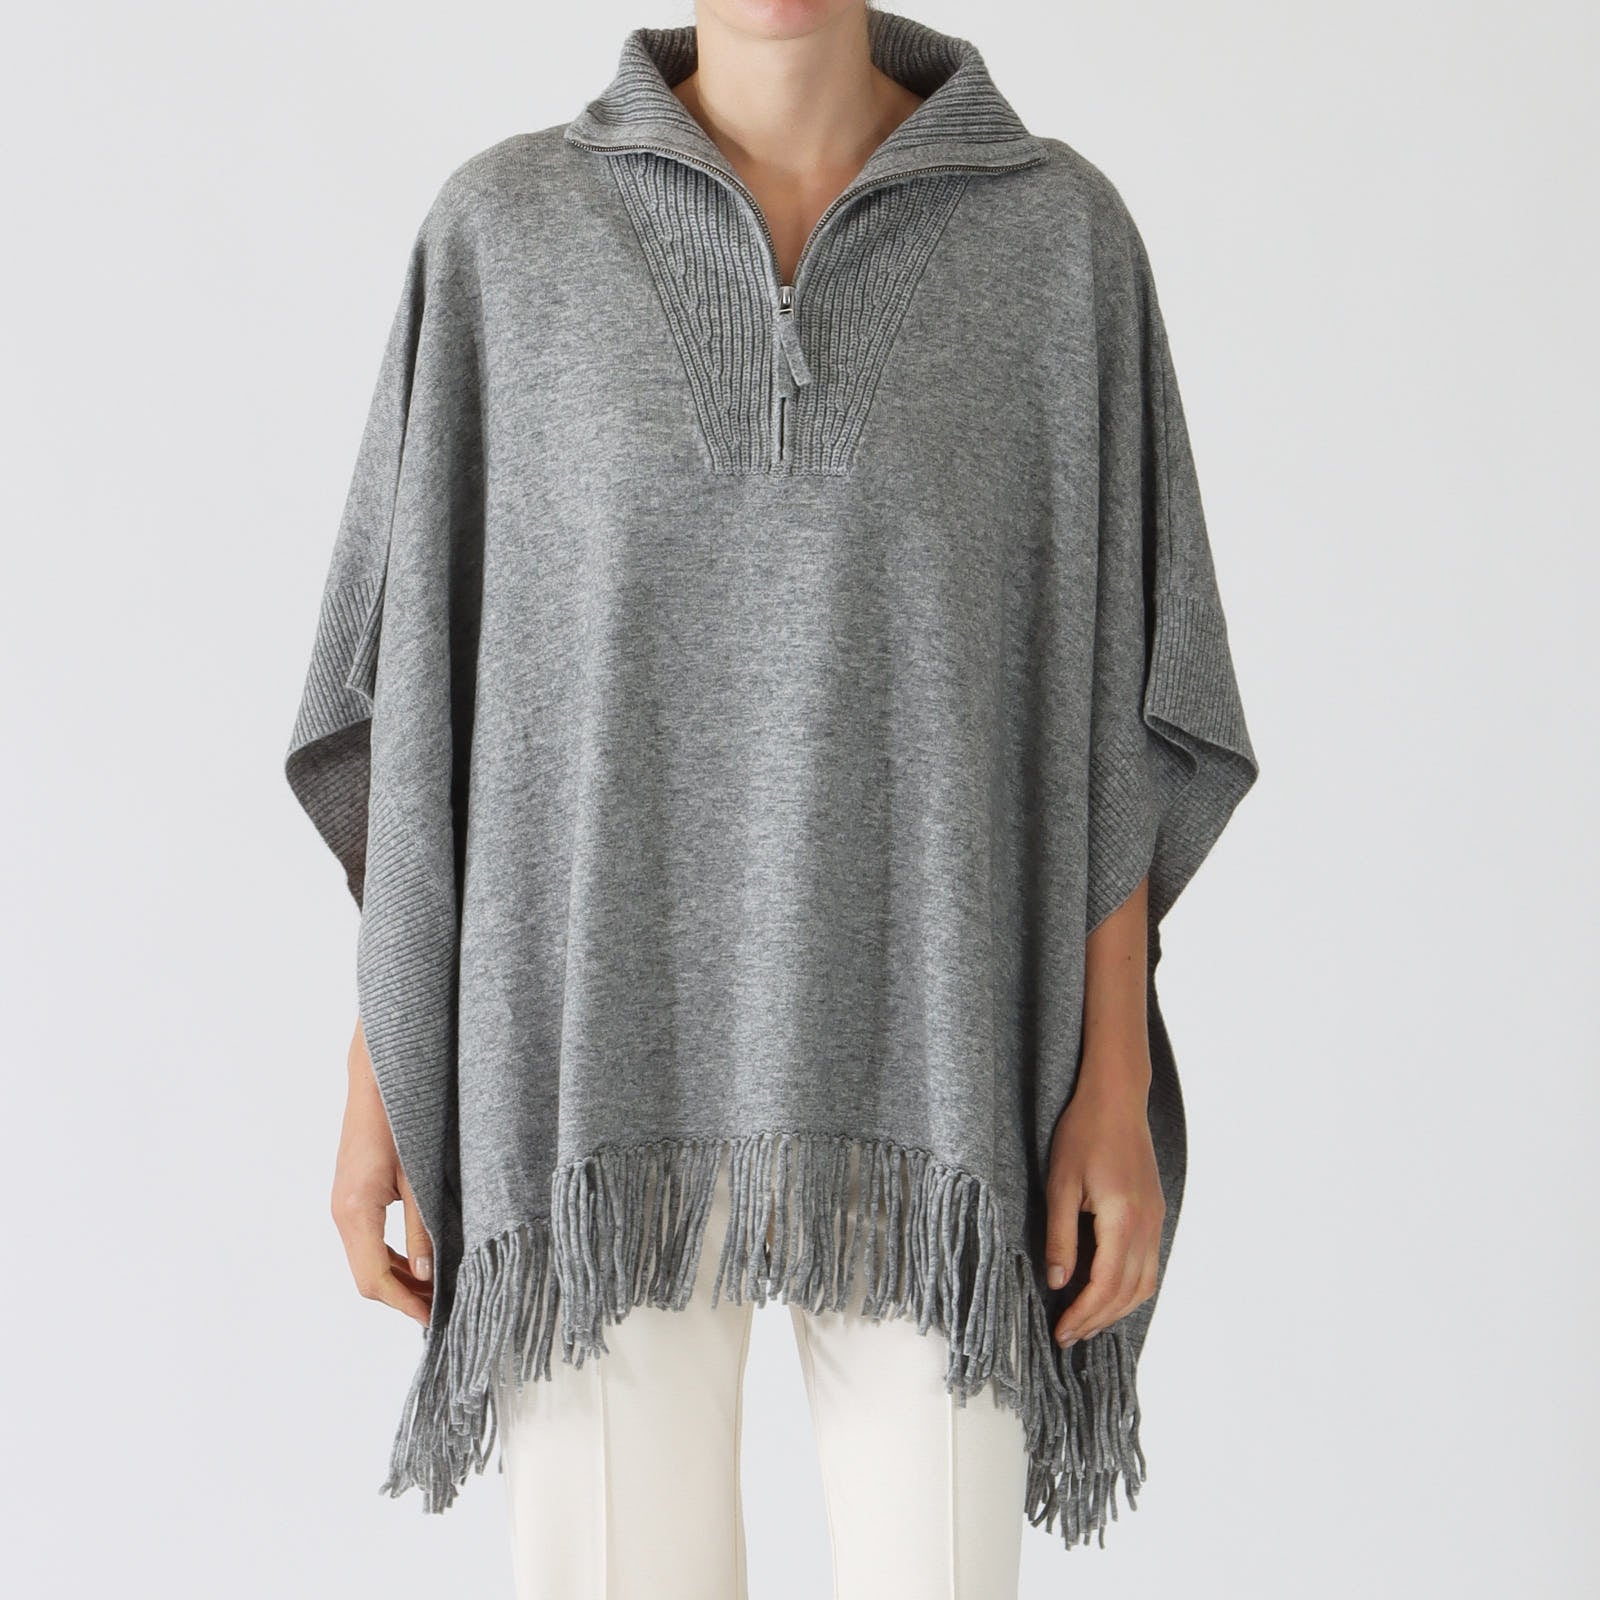 Light Grey Fringed Poncho With Zip-Up Collar